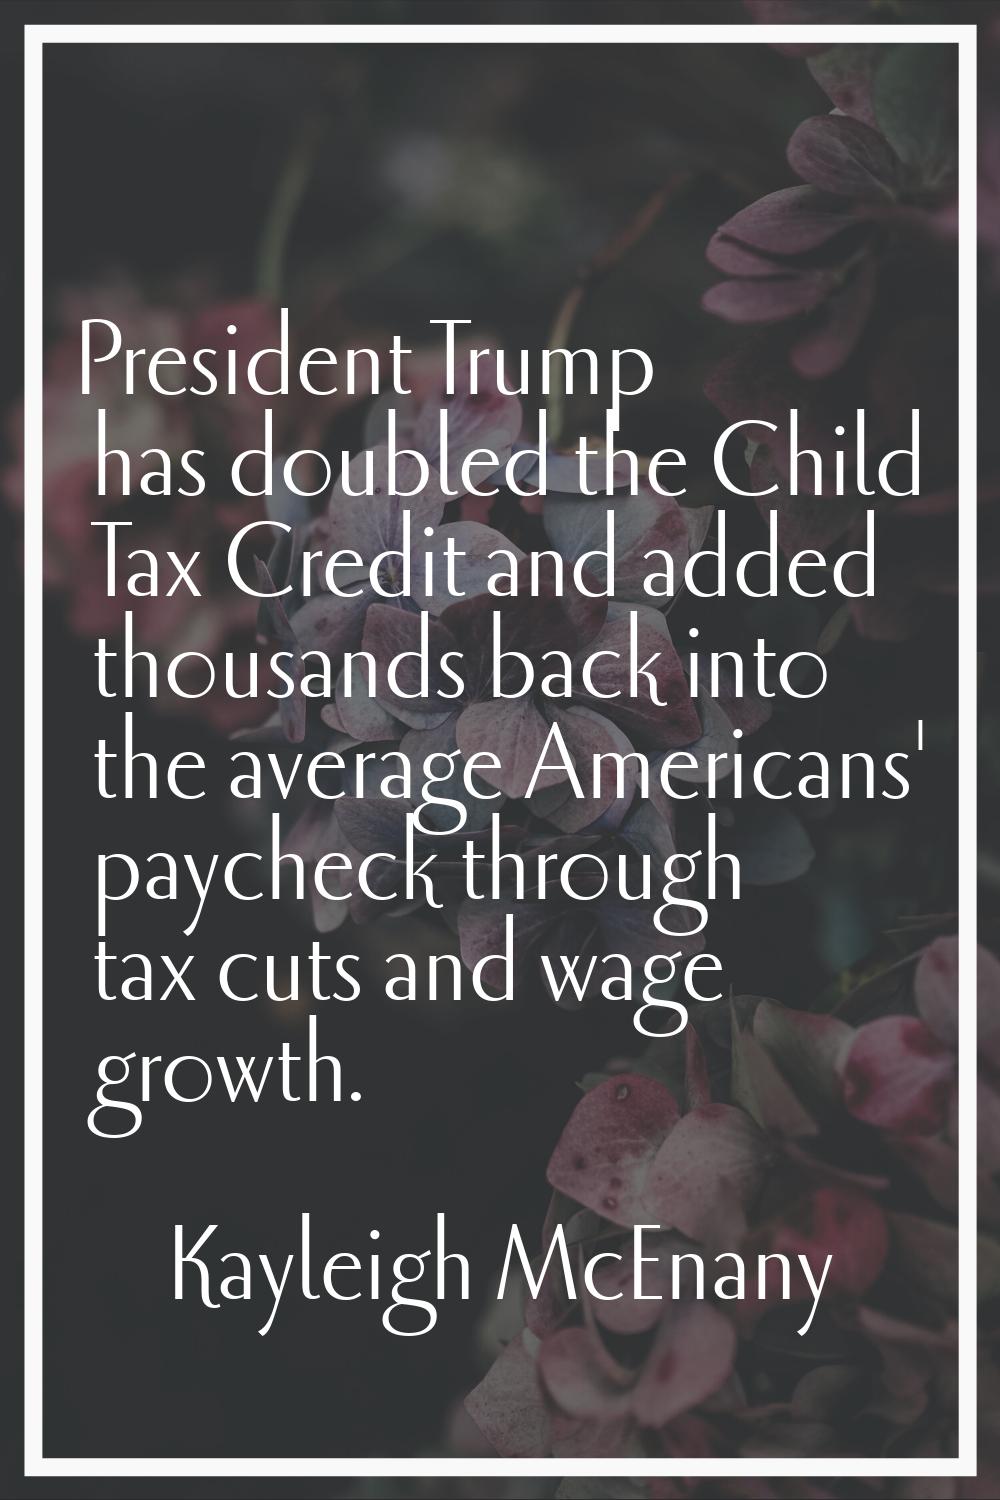 President Trump has doubled the Child Tax Credit and added thousands back into the average American